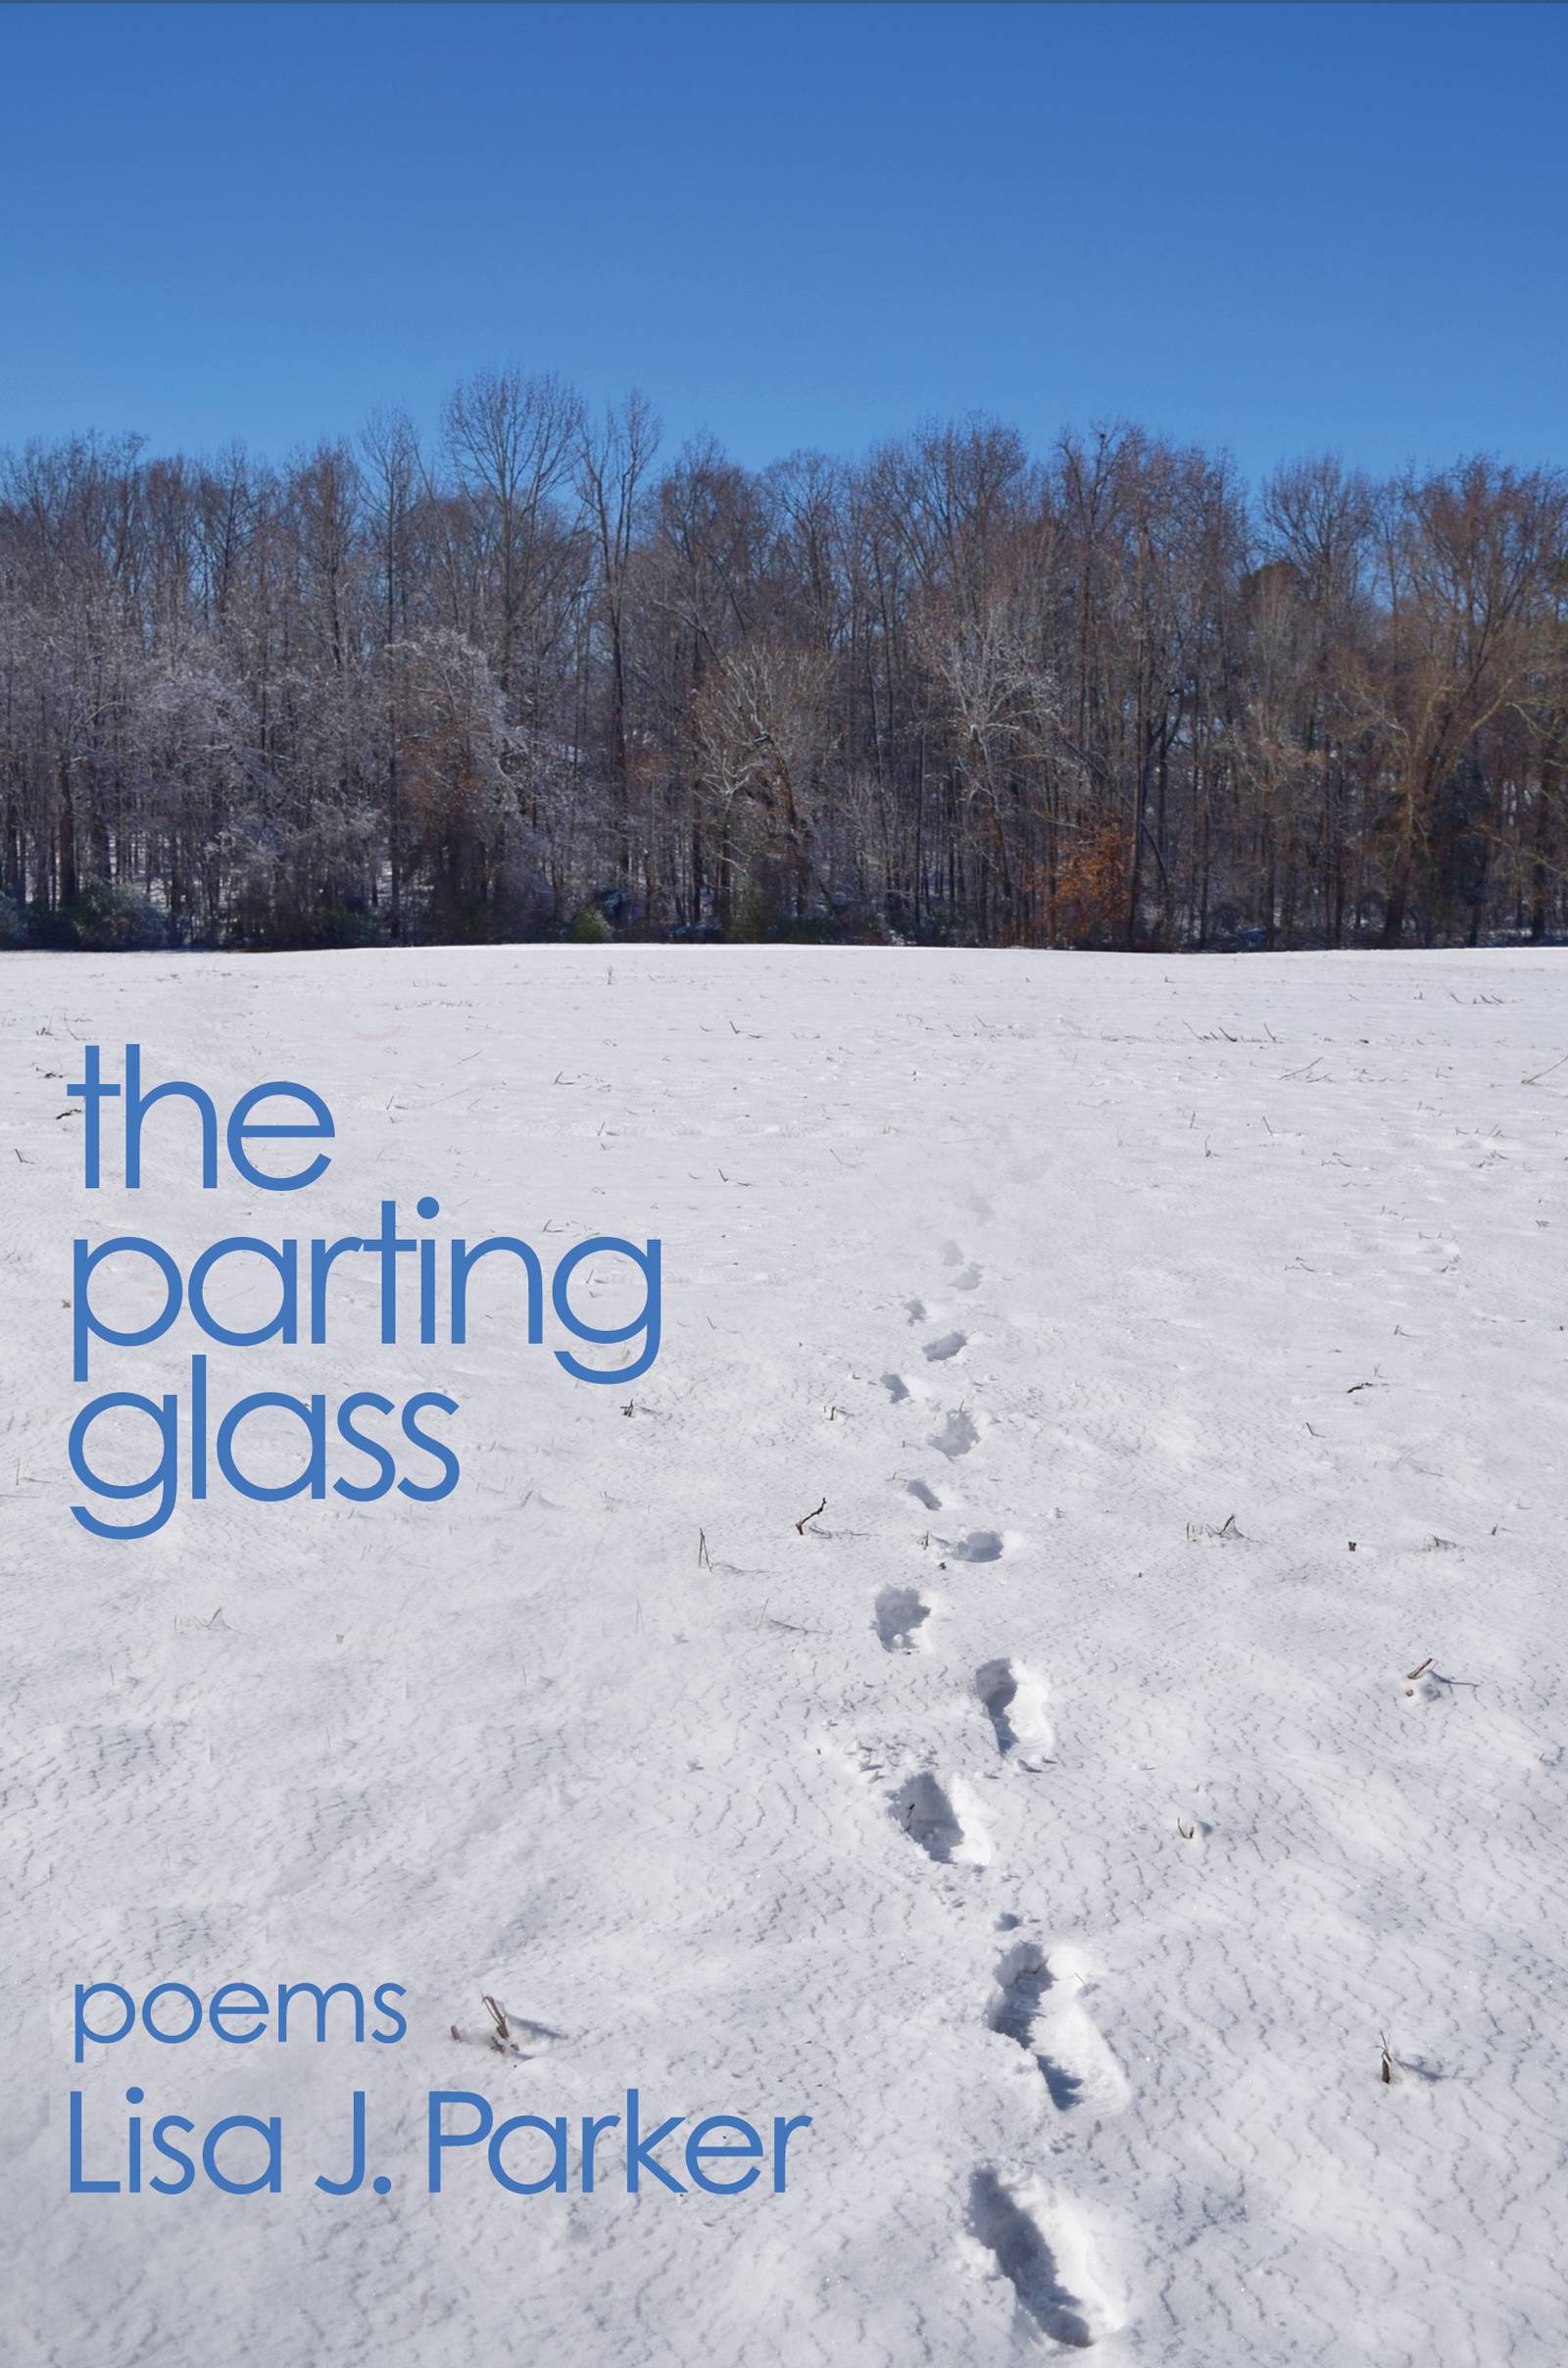 The Parting Glass: Poems by Lisa J. Parker white snow with one set of footprints leads to a line of trees beneath a bright blue sky in the distance